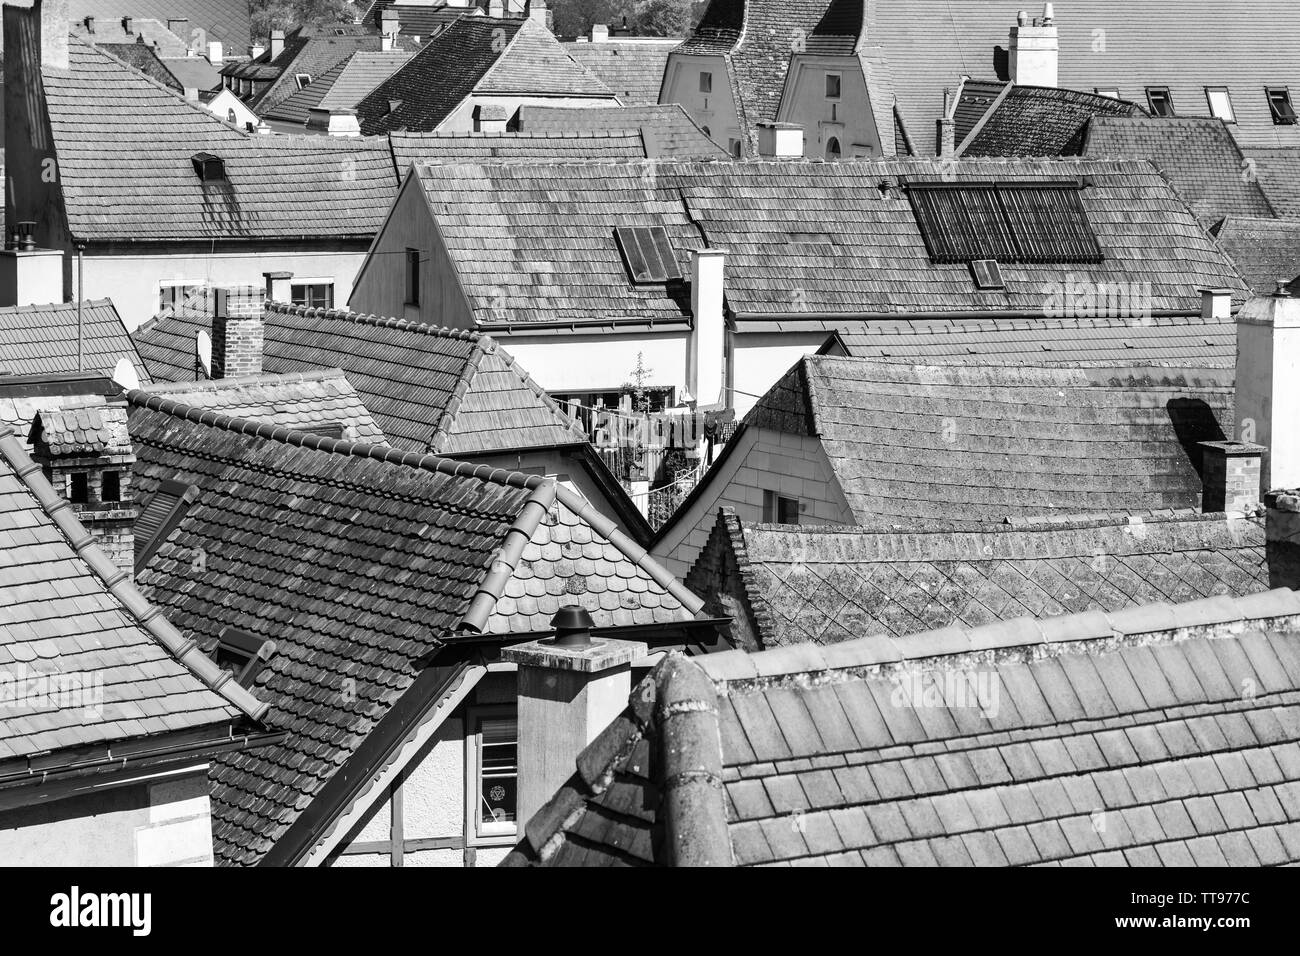 A view across the old town tiled rooftops of Stein an der Donau, a UNESCO World Heritage site in Lower Austria Stock Photo